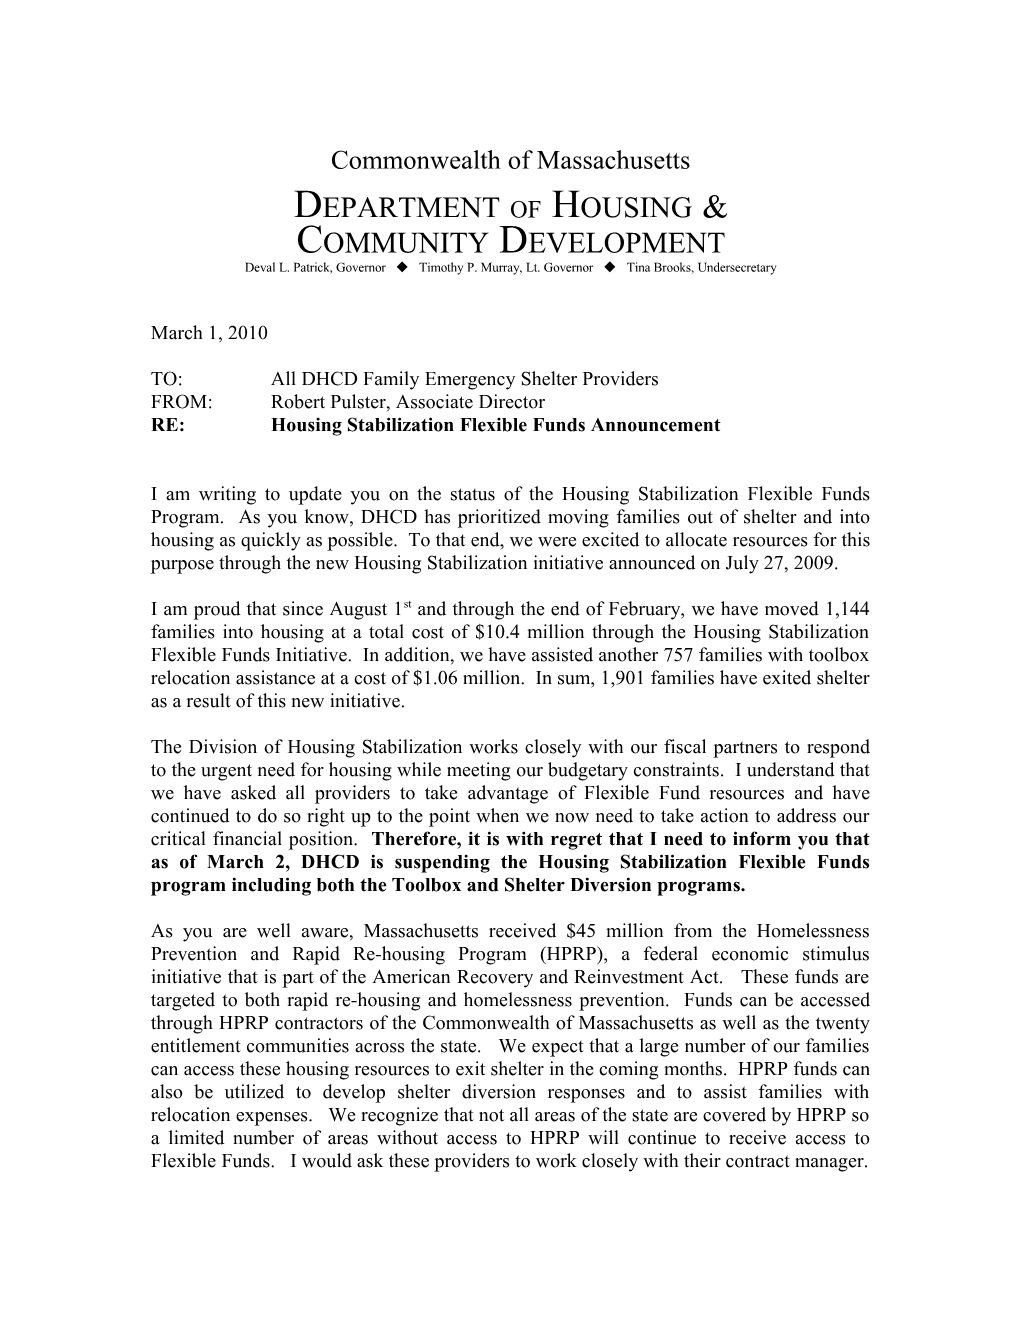 A Message from the Division of Housing Stabilization